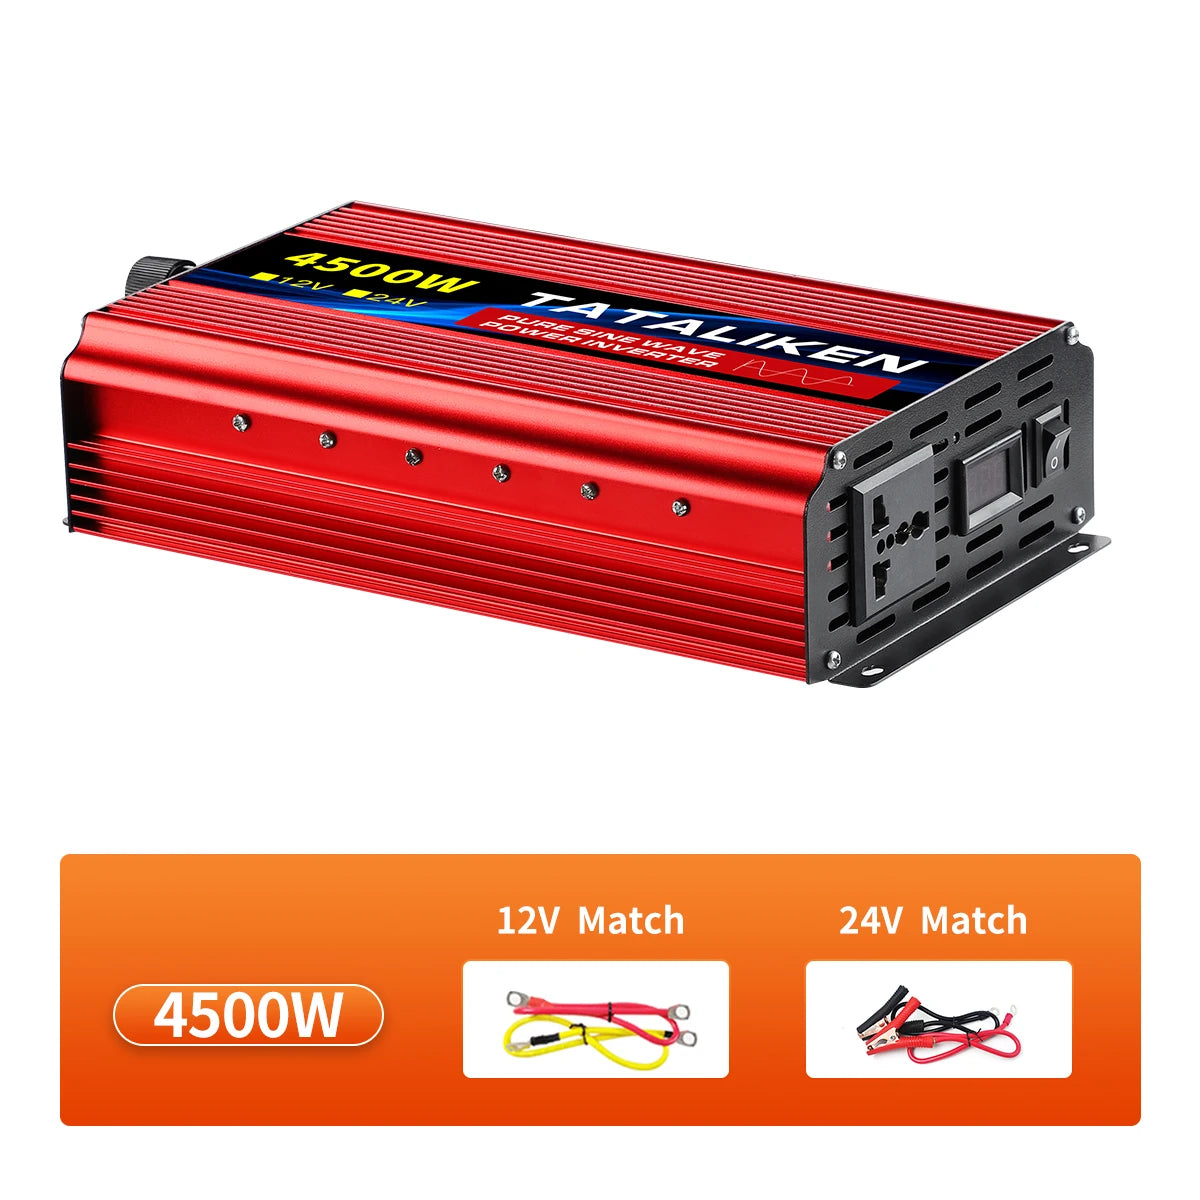 DC/AC Inverter Specifications for Type 1600/2500/3500/4500/5000 by Tataliken, Mainland China.